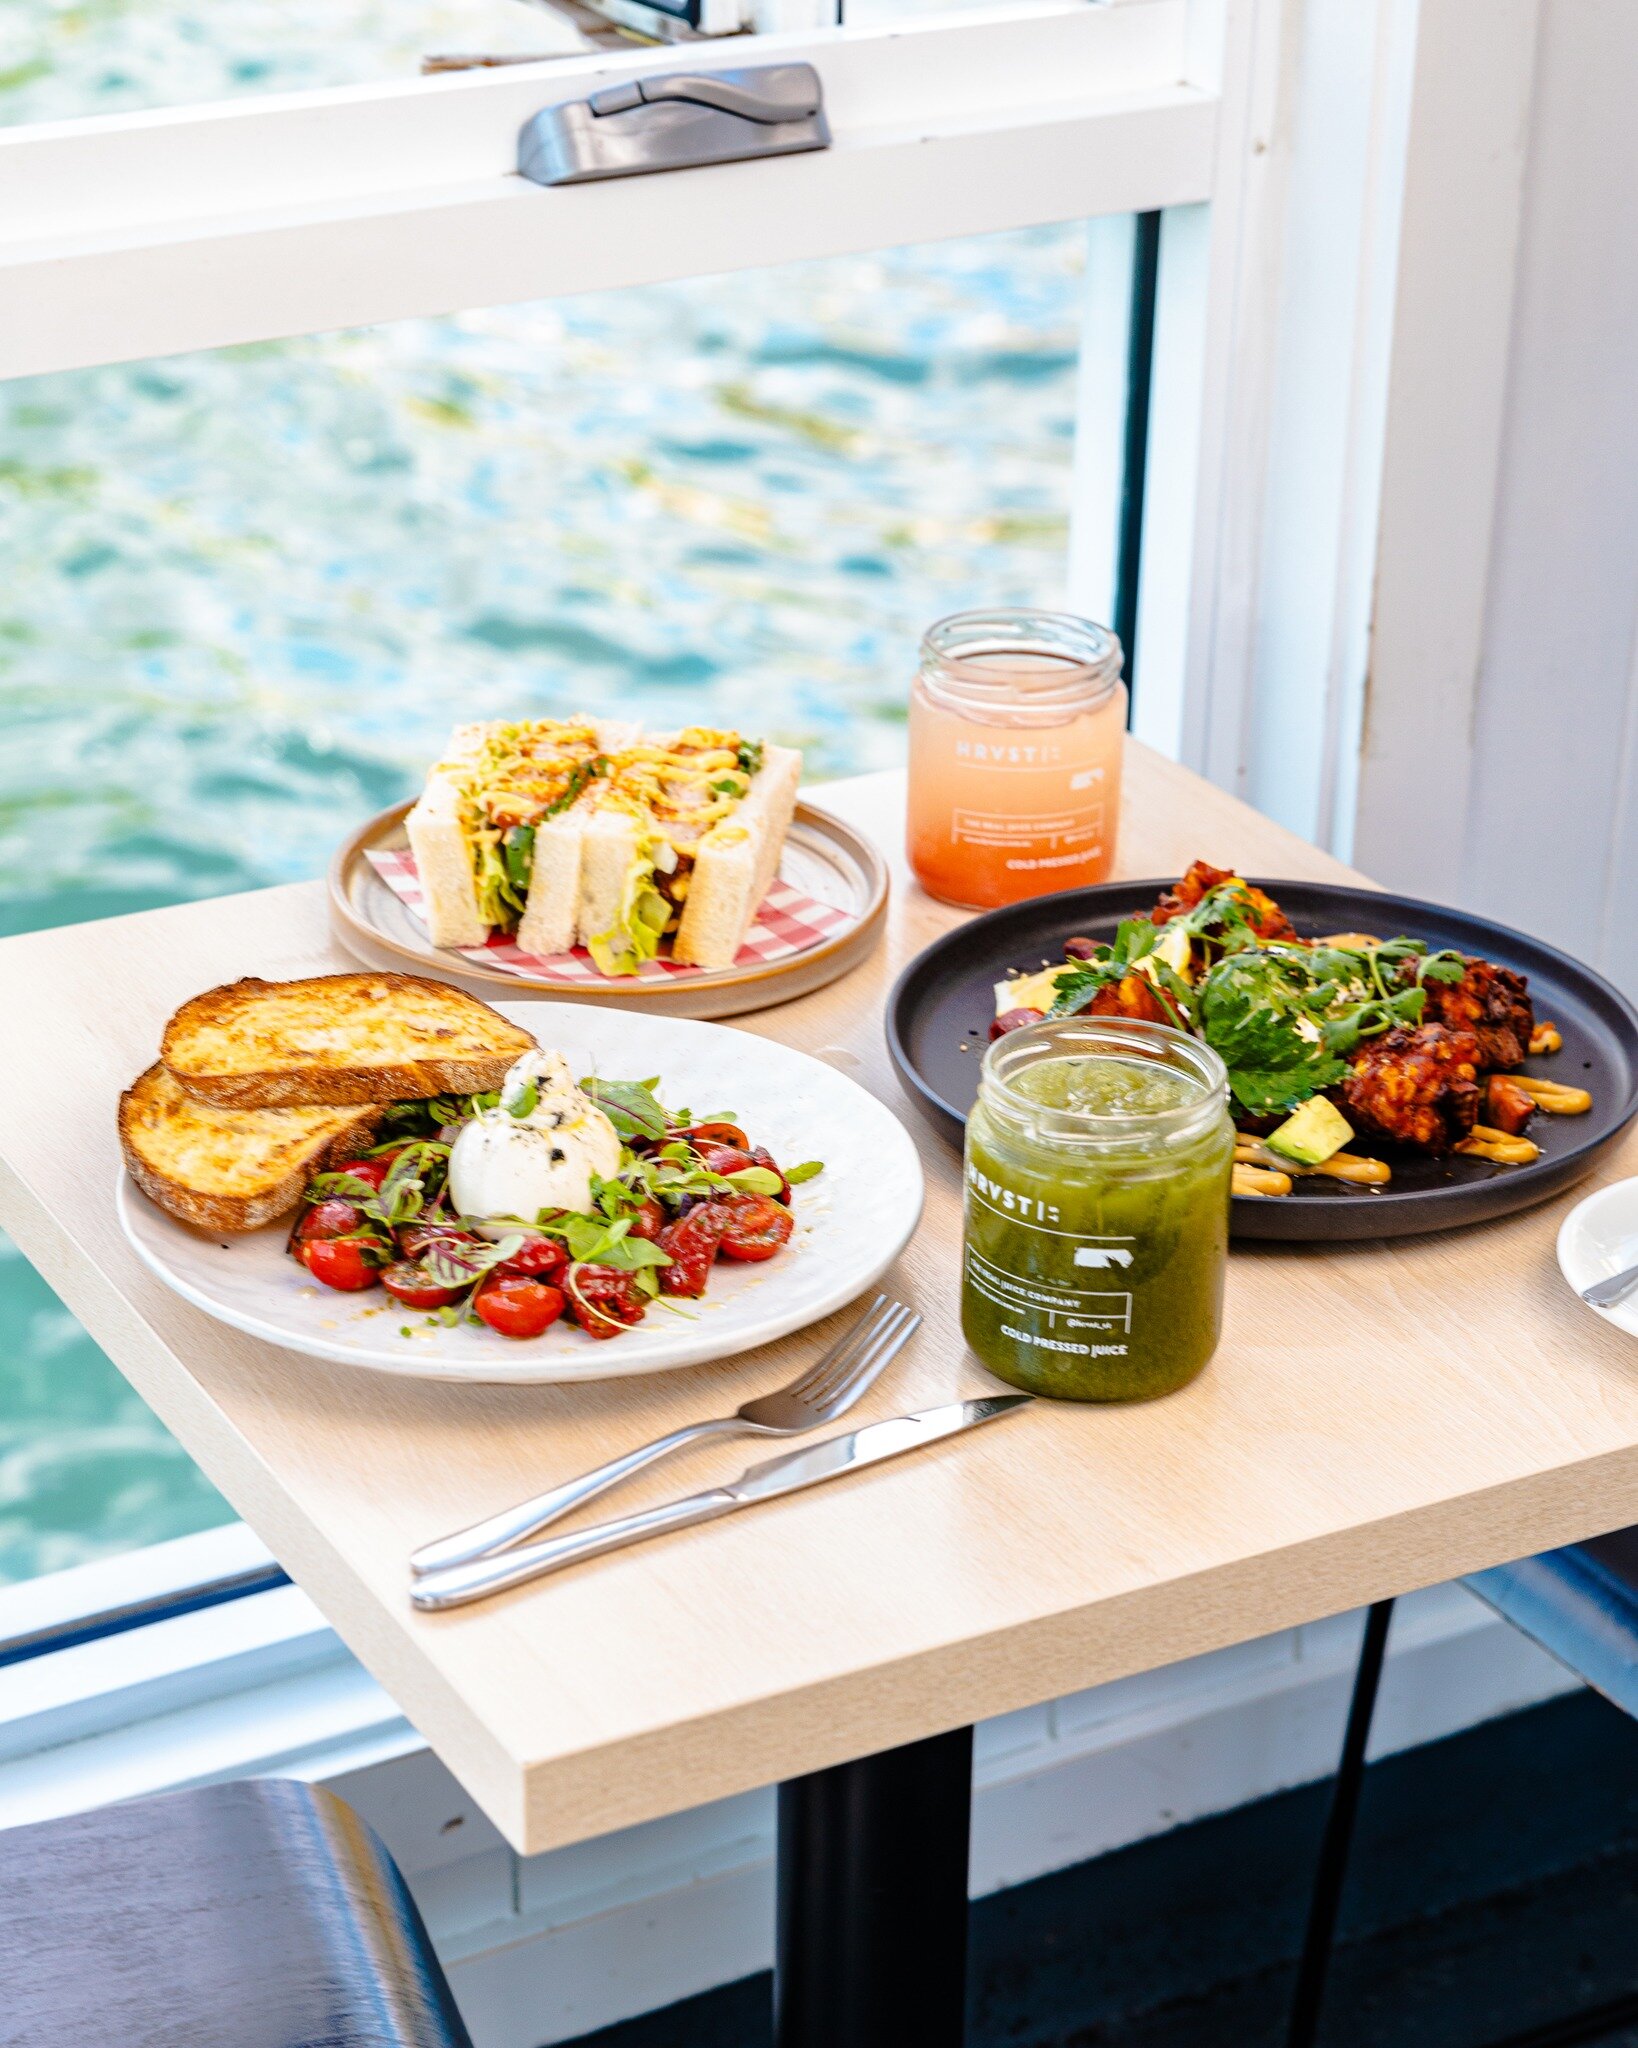 An iconic breakfast with an equally iconic view? 

Say less, we know just the spot. 😉

#CelsiusCoffeeCo

#sydneycoffee #sydneycafe #coffeeshop #cafes #waterviews  #sydneybrunchspots #sydneyfoodshare #sydneybrunch #brunchspots